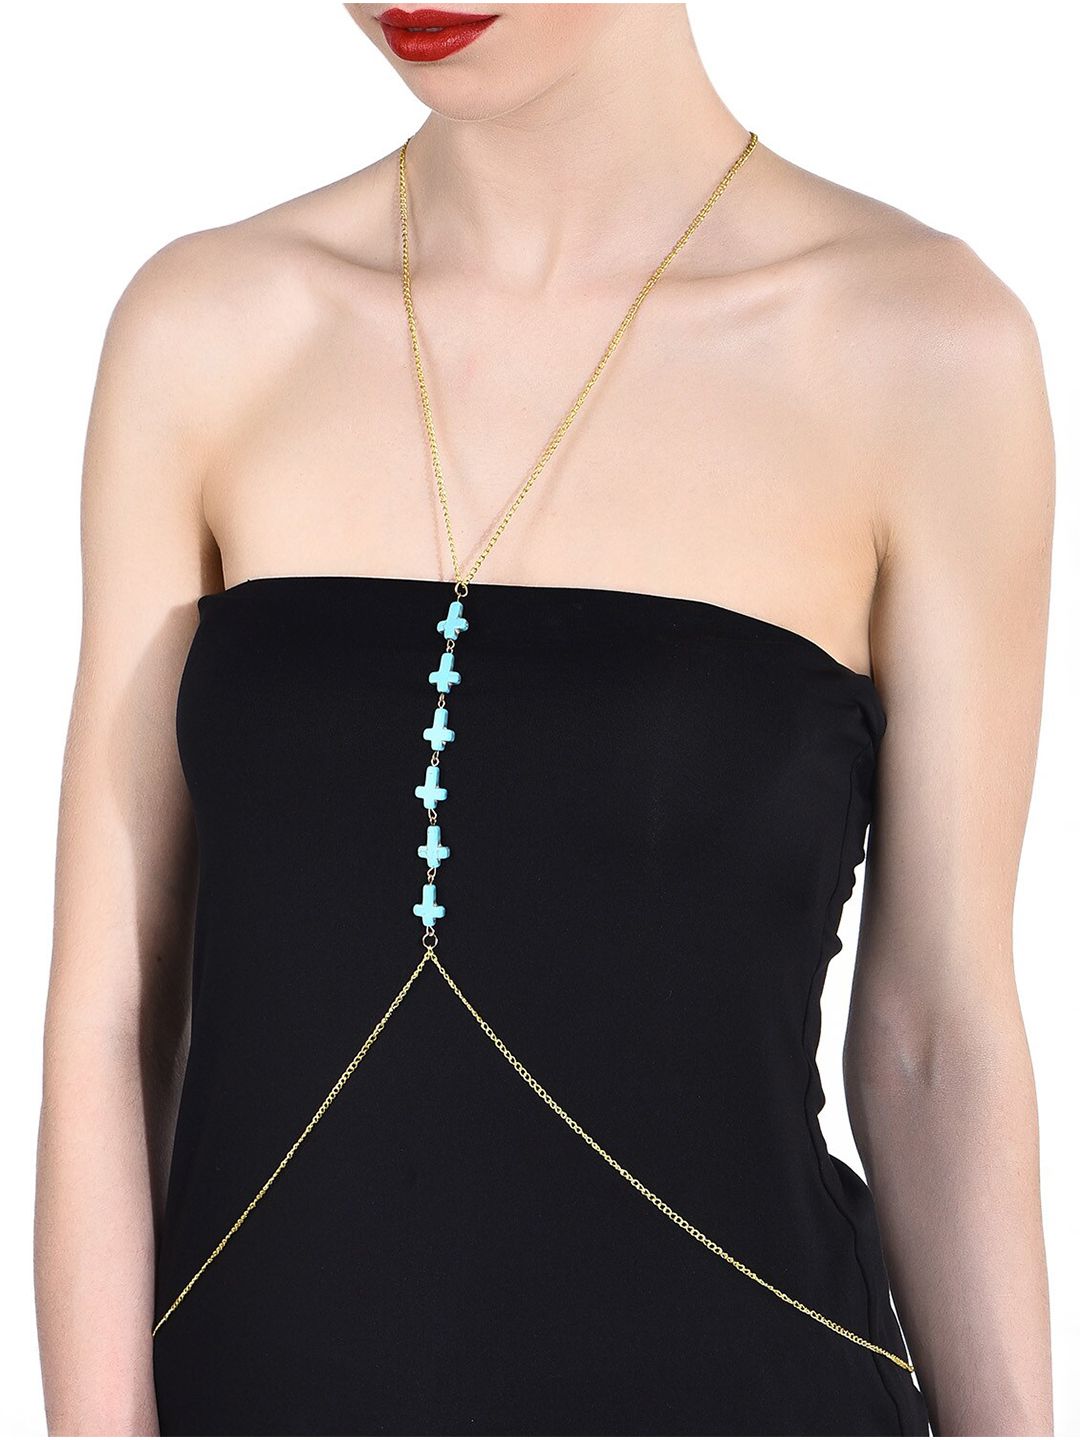 FemNmas Gold-Toned & Blue Gold-Plated Cross Body Chain Price in India